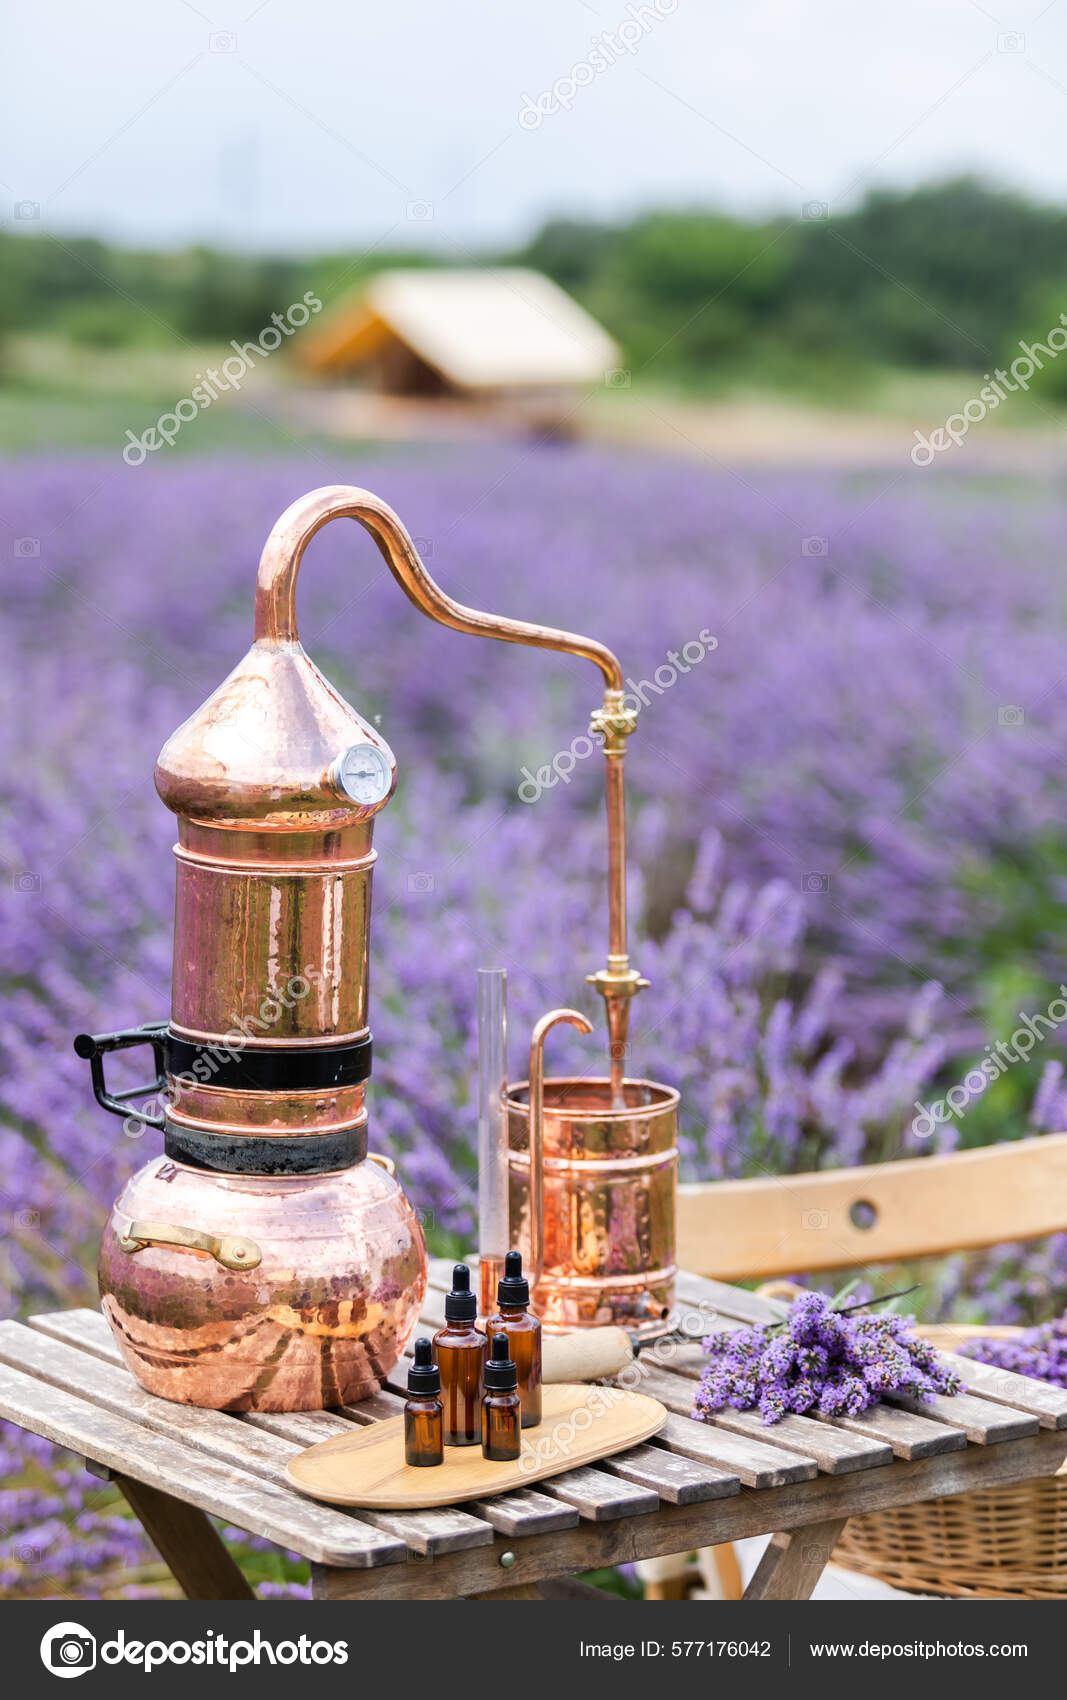 How to Distill Lavender Essential Oils